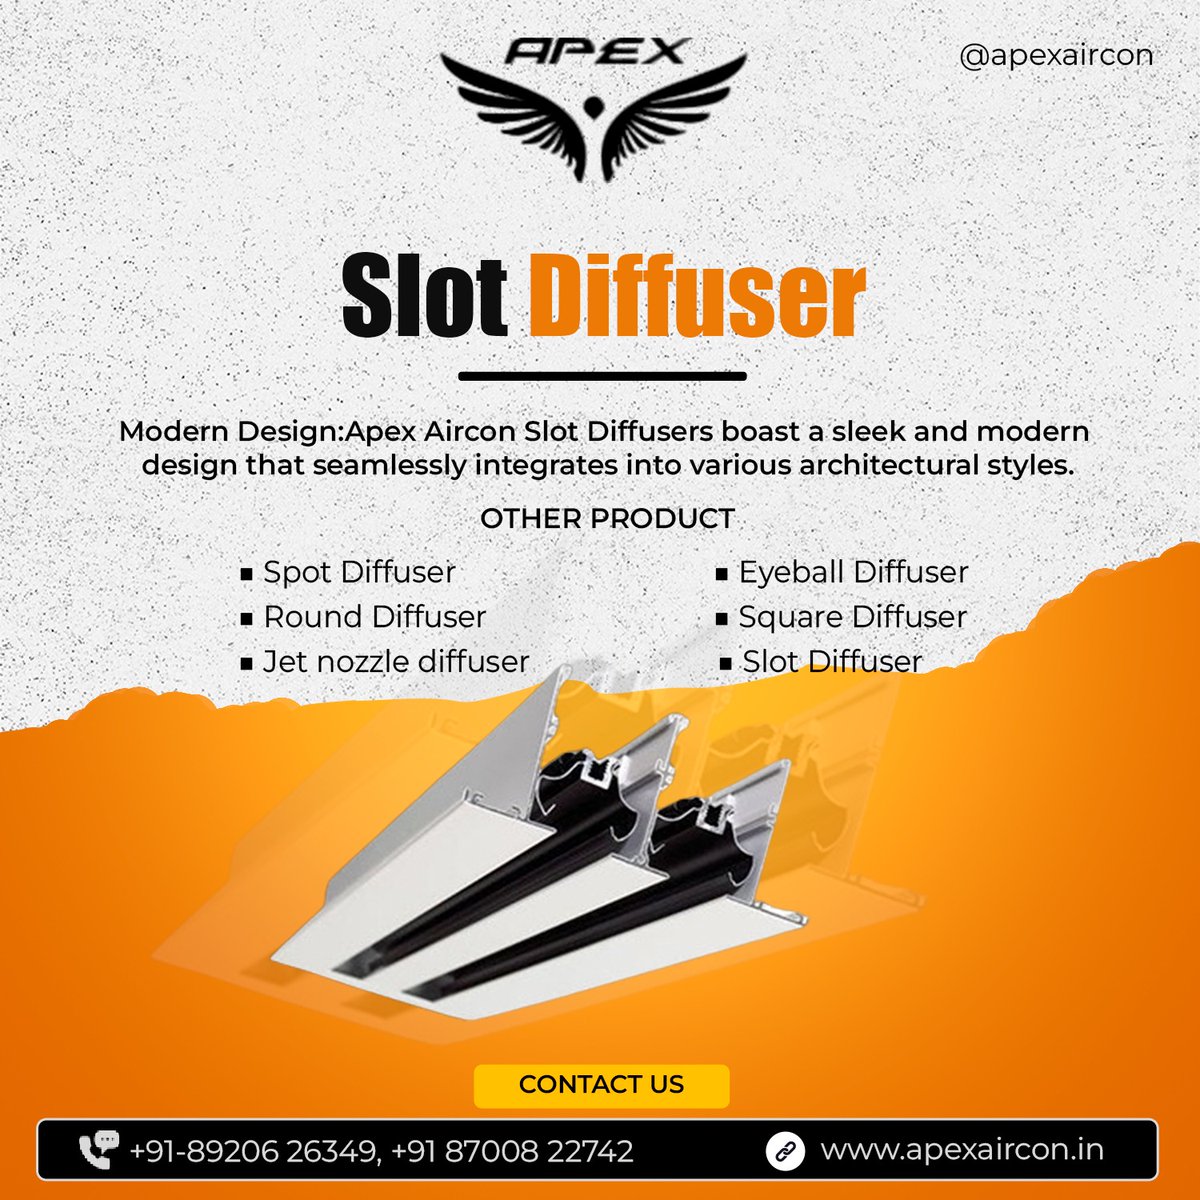 SLOT DIFFUSERS
Call Us:-+91-89206 26349, +91 87008 22742
Visit:-www.apexaircon.in
#diffuser #essentialoils #aromatherapy #essentialoil #youngliving #younglivingessentialoils #yleo #healthylifestyle #wellness #humidifier